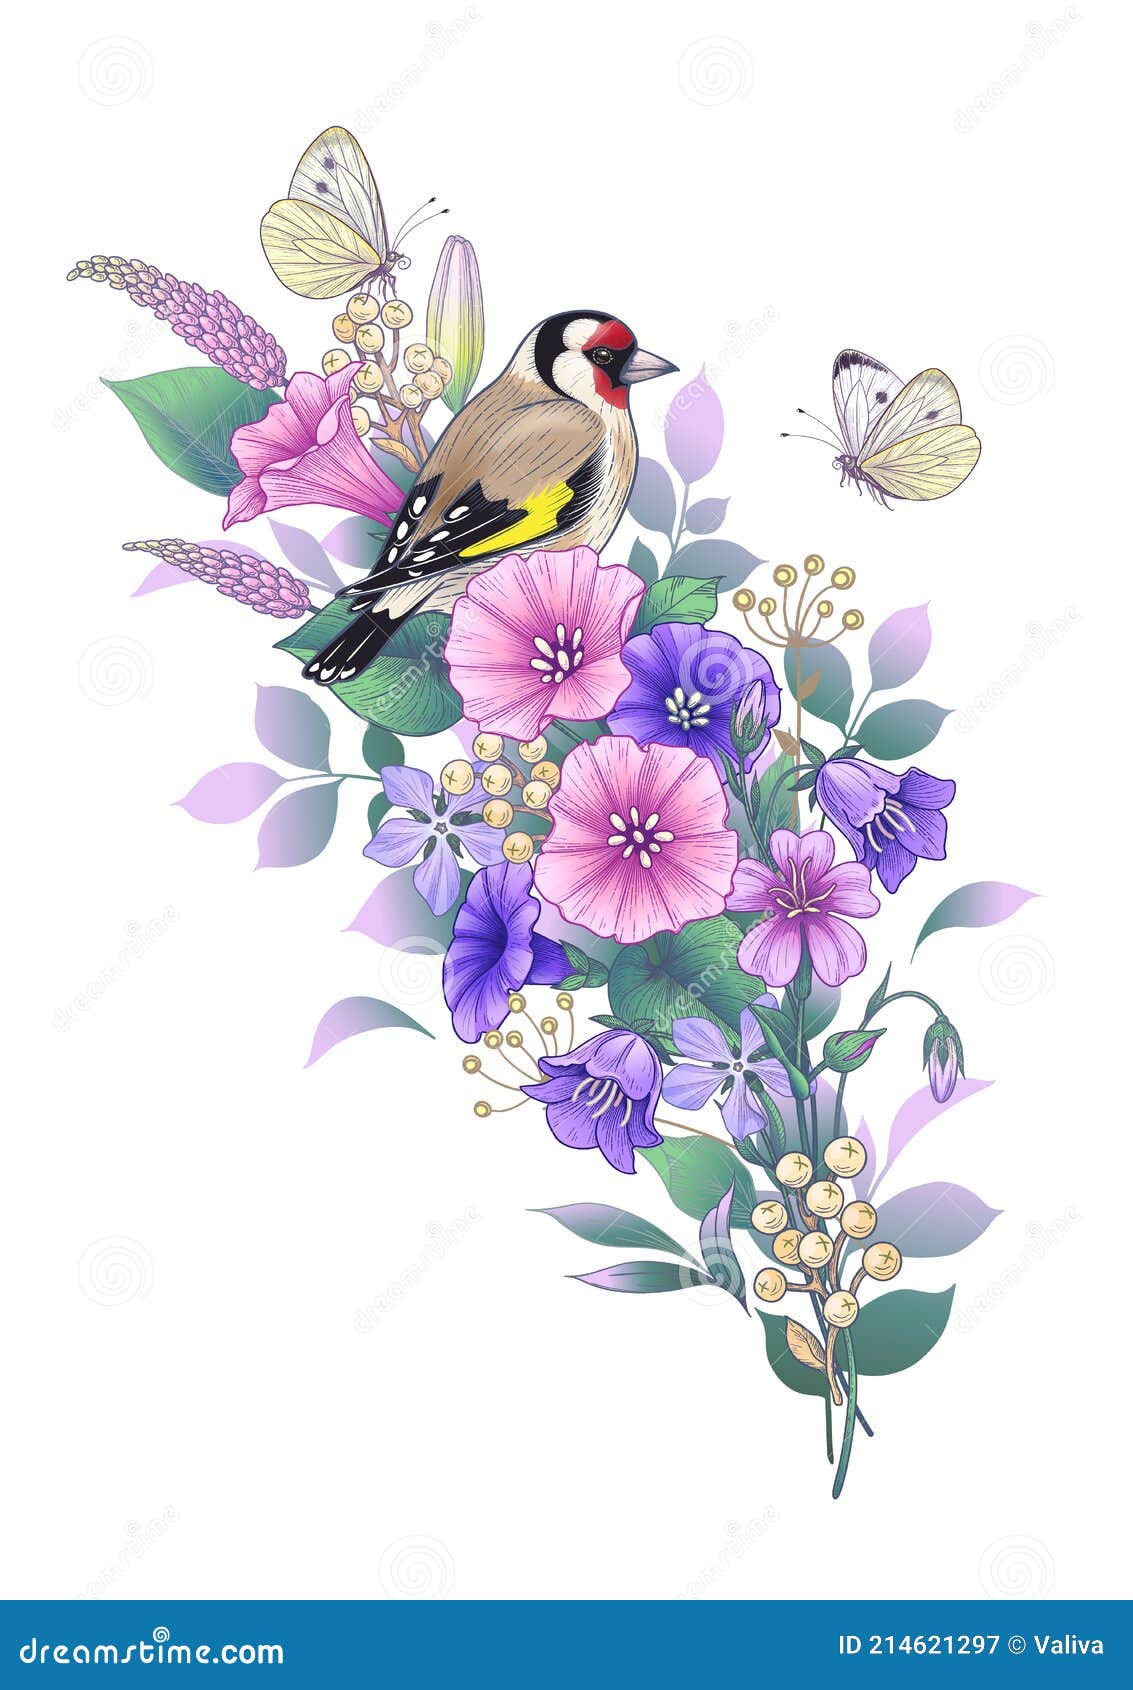 goldfinch, butterflies  and wildflowers bouquet